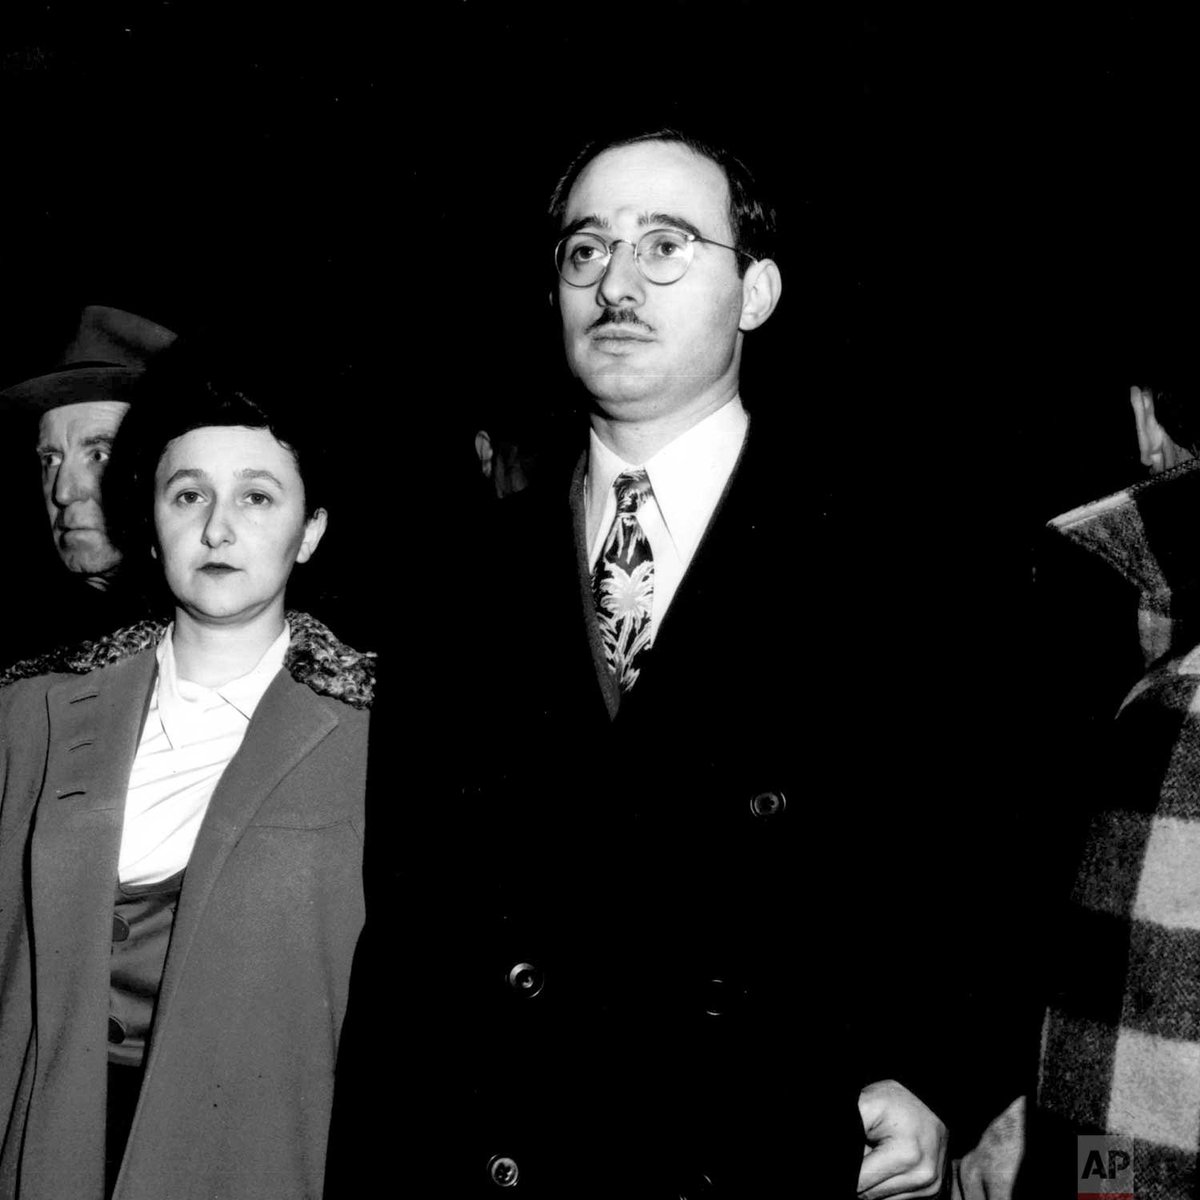 70 years ago today, Julius and Ethel Rosenberg were sentenced to death following their conviction in New York on charges of conspiring to commit espionage for the Soviet Union.